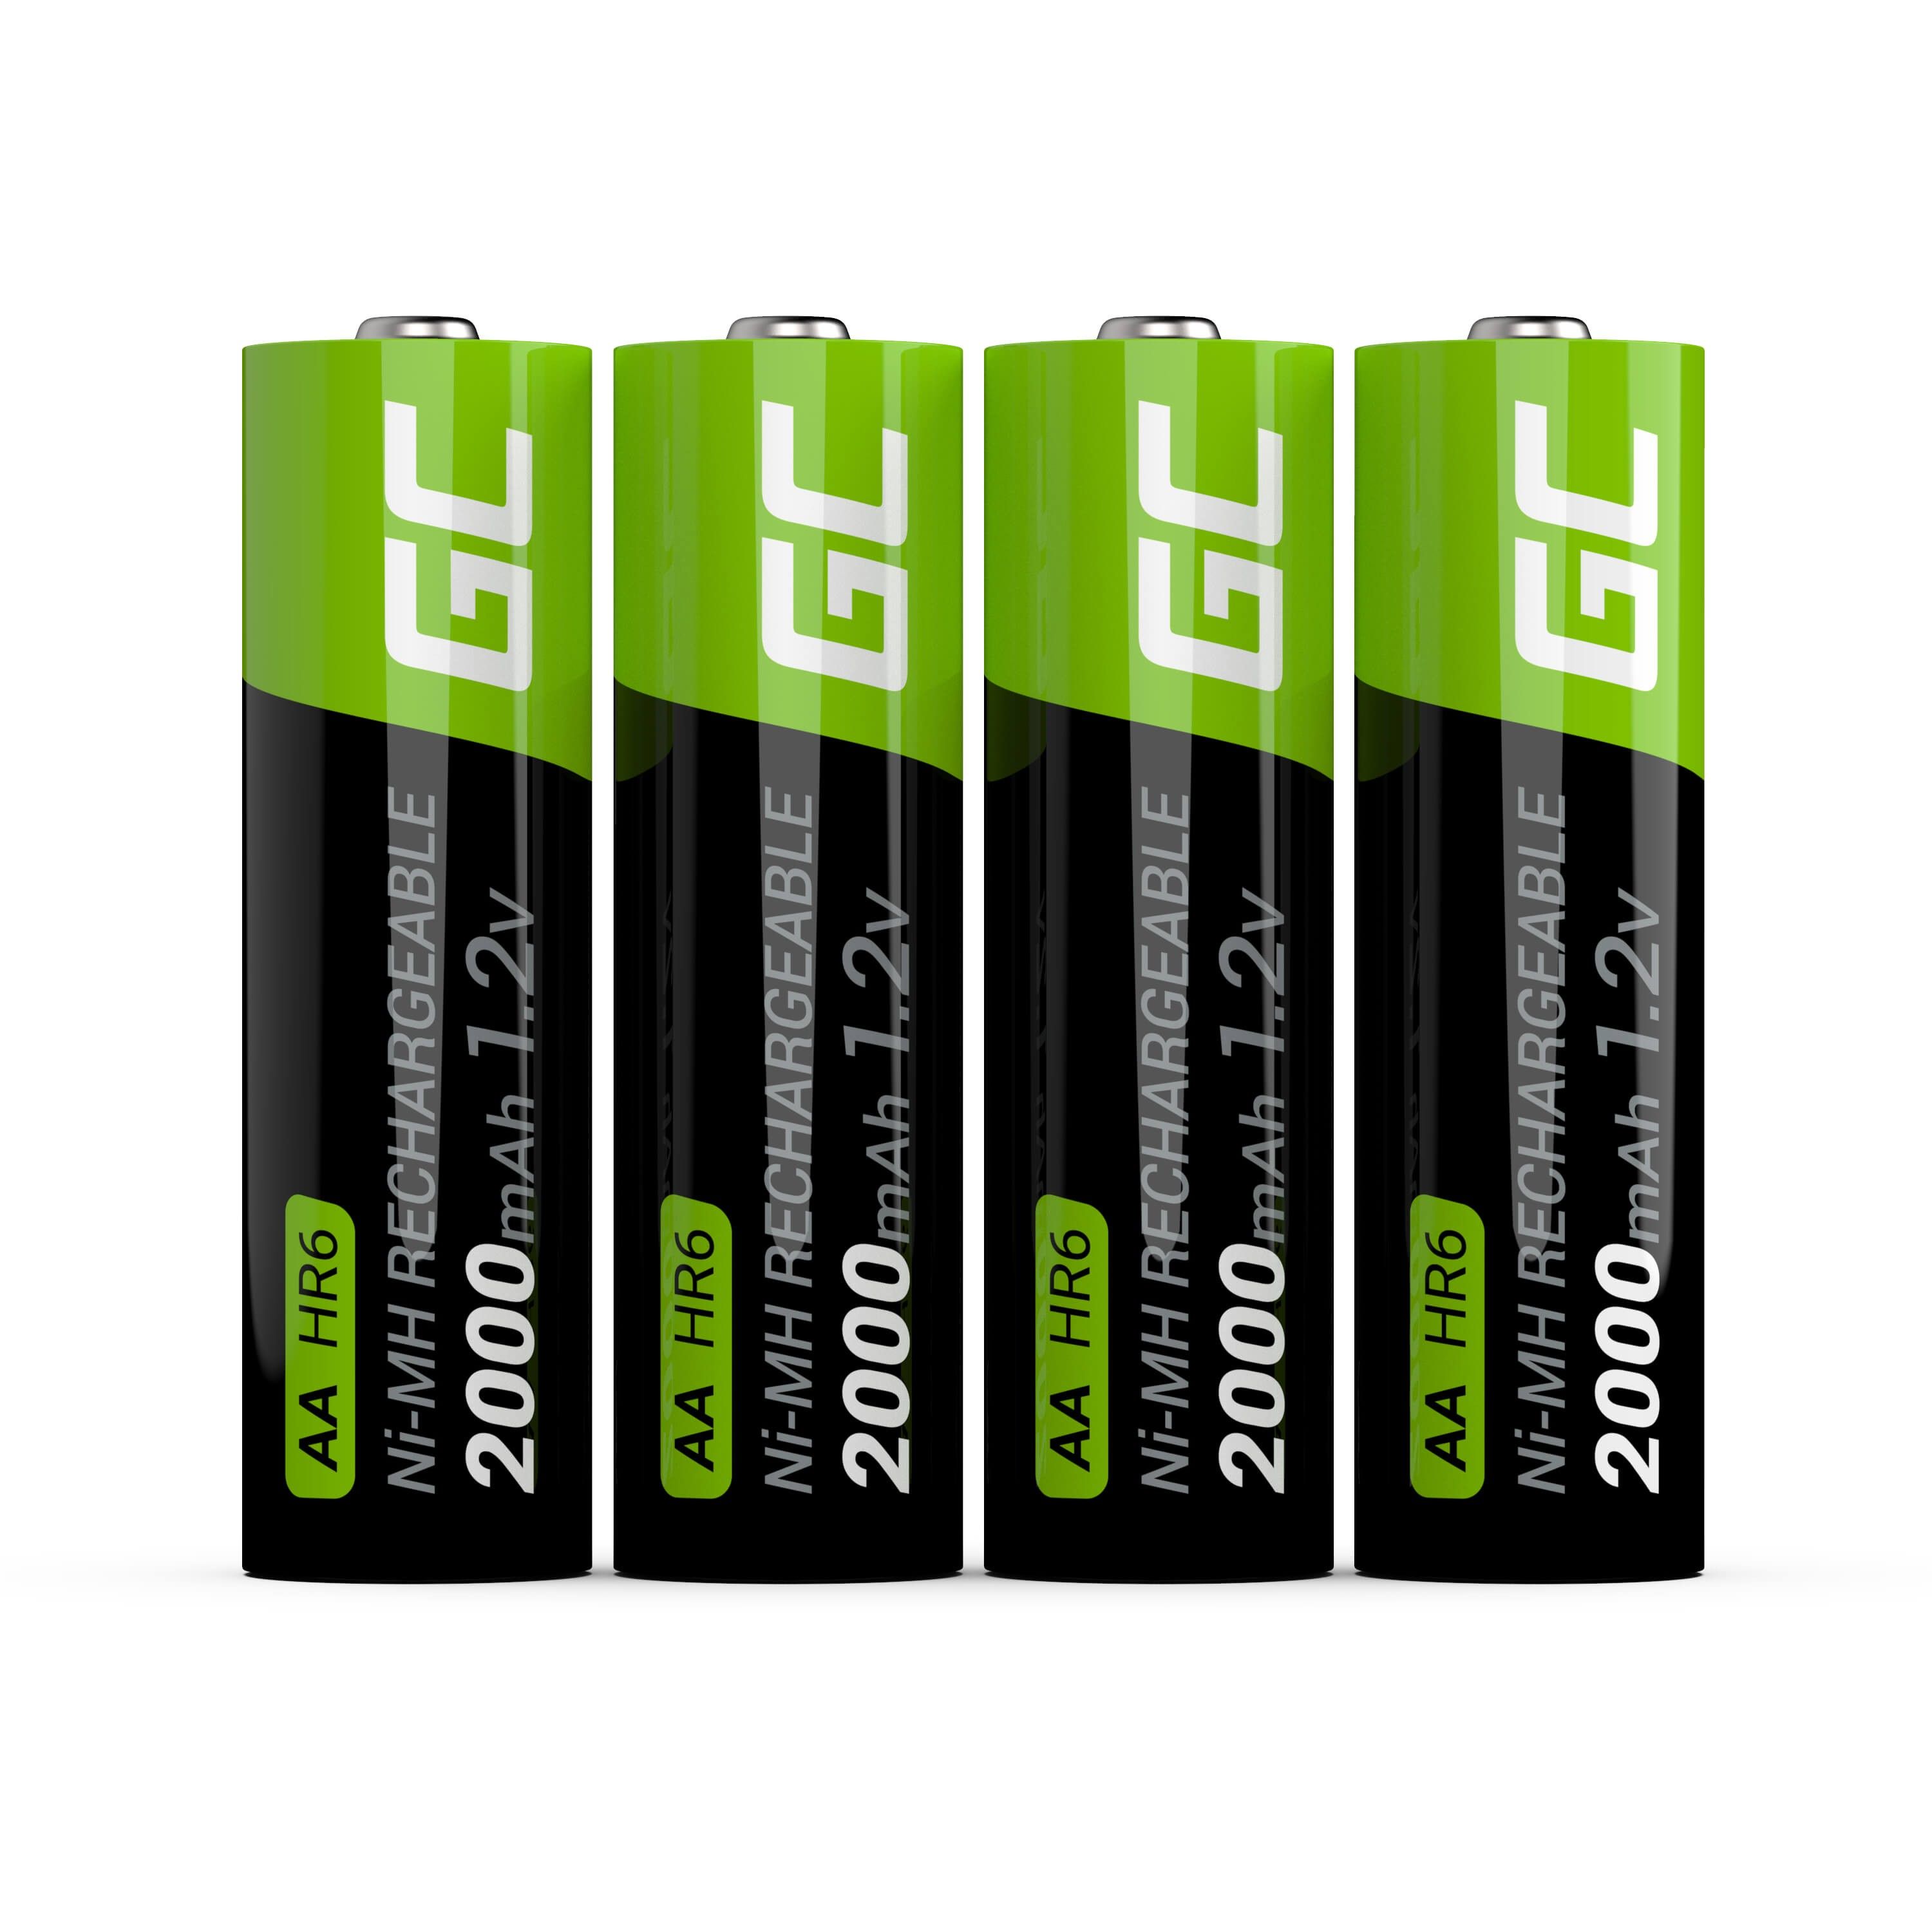 Green Cell GR02 household battery Rechargeable battery AA Nickel-Metal Hydride (NiMH) 4x AA HR6 2000 mAh_2